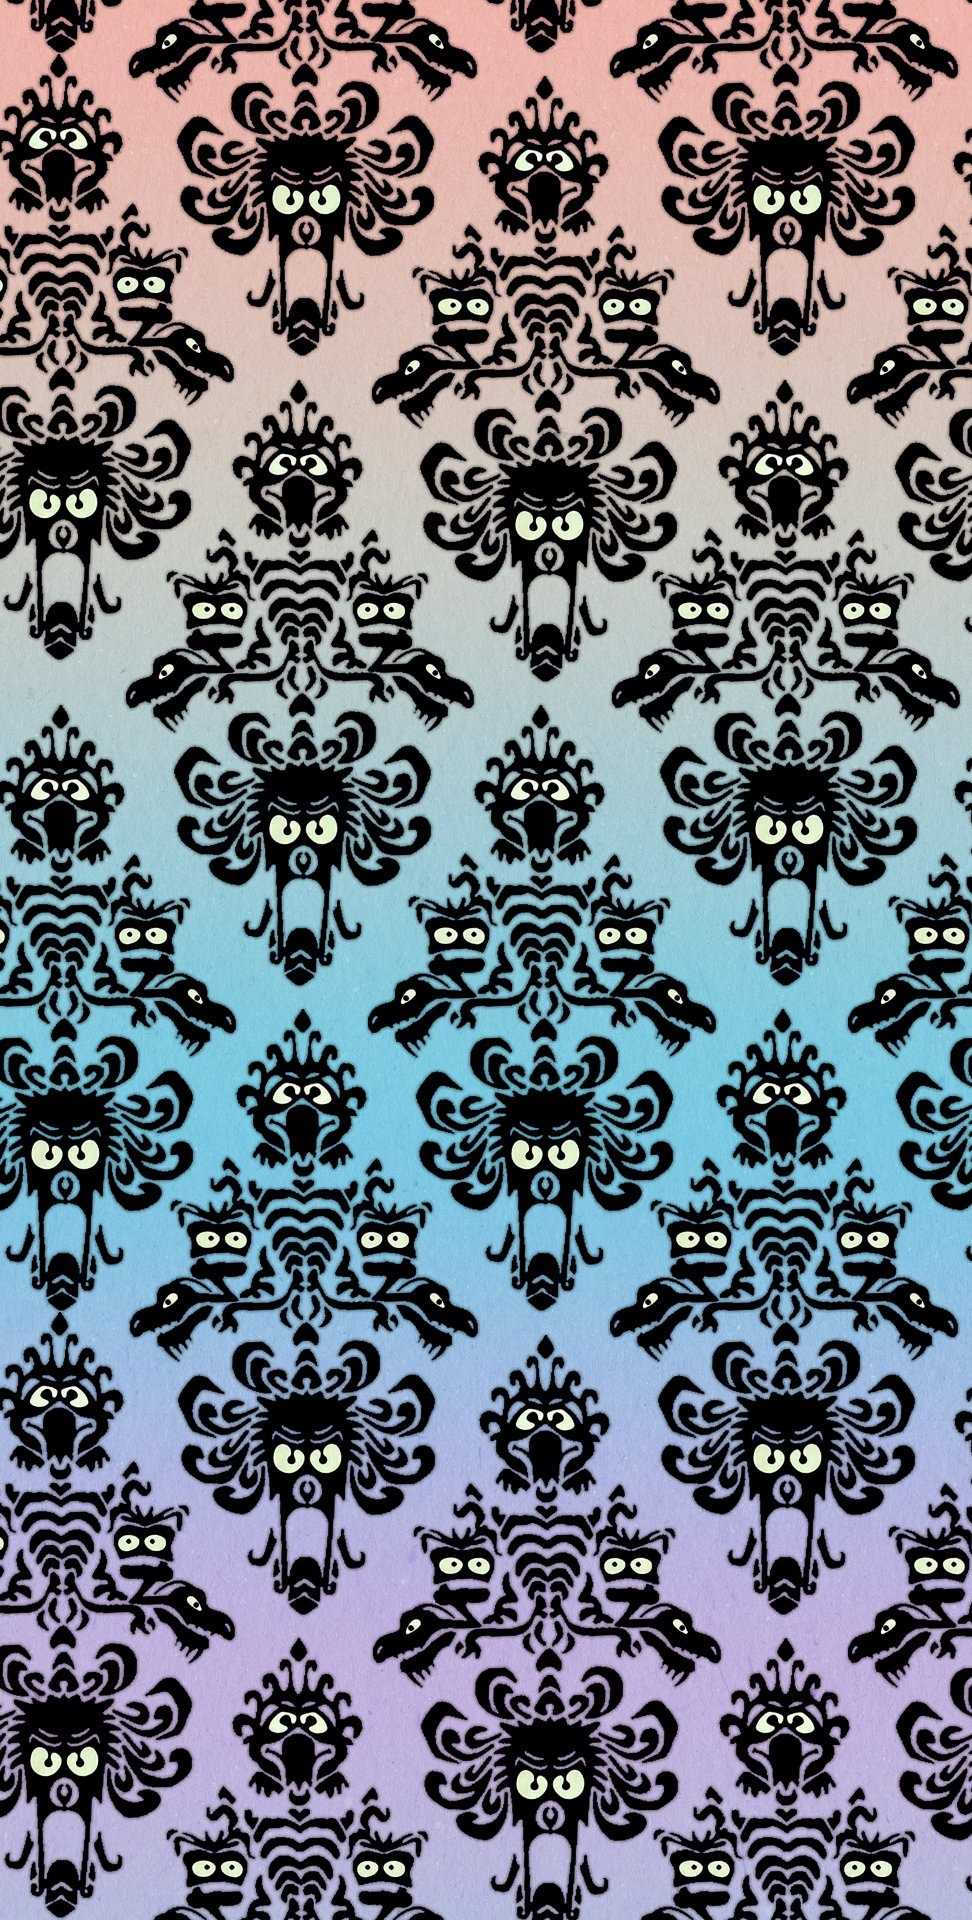 Android Haunted Mansion Wallpaper 1